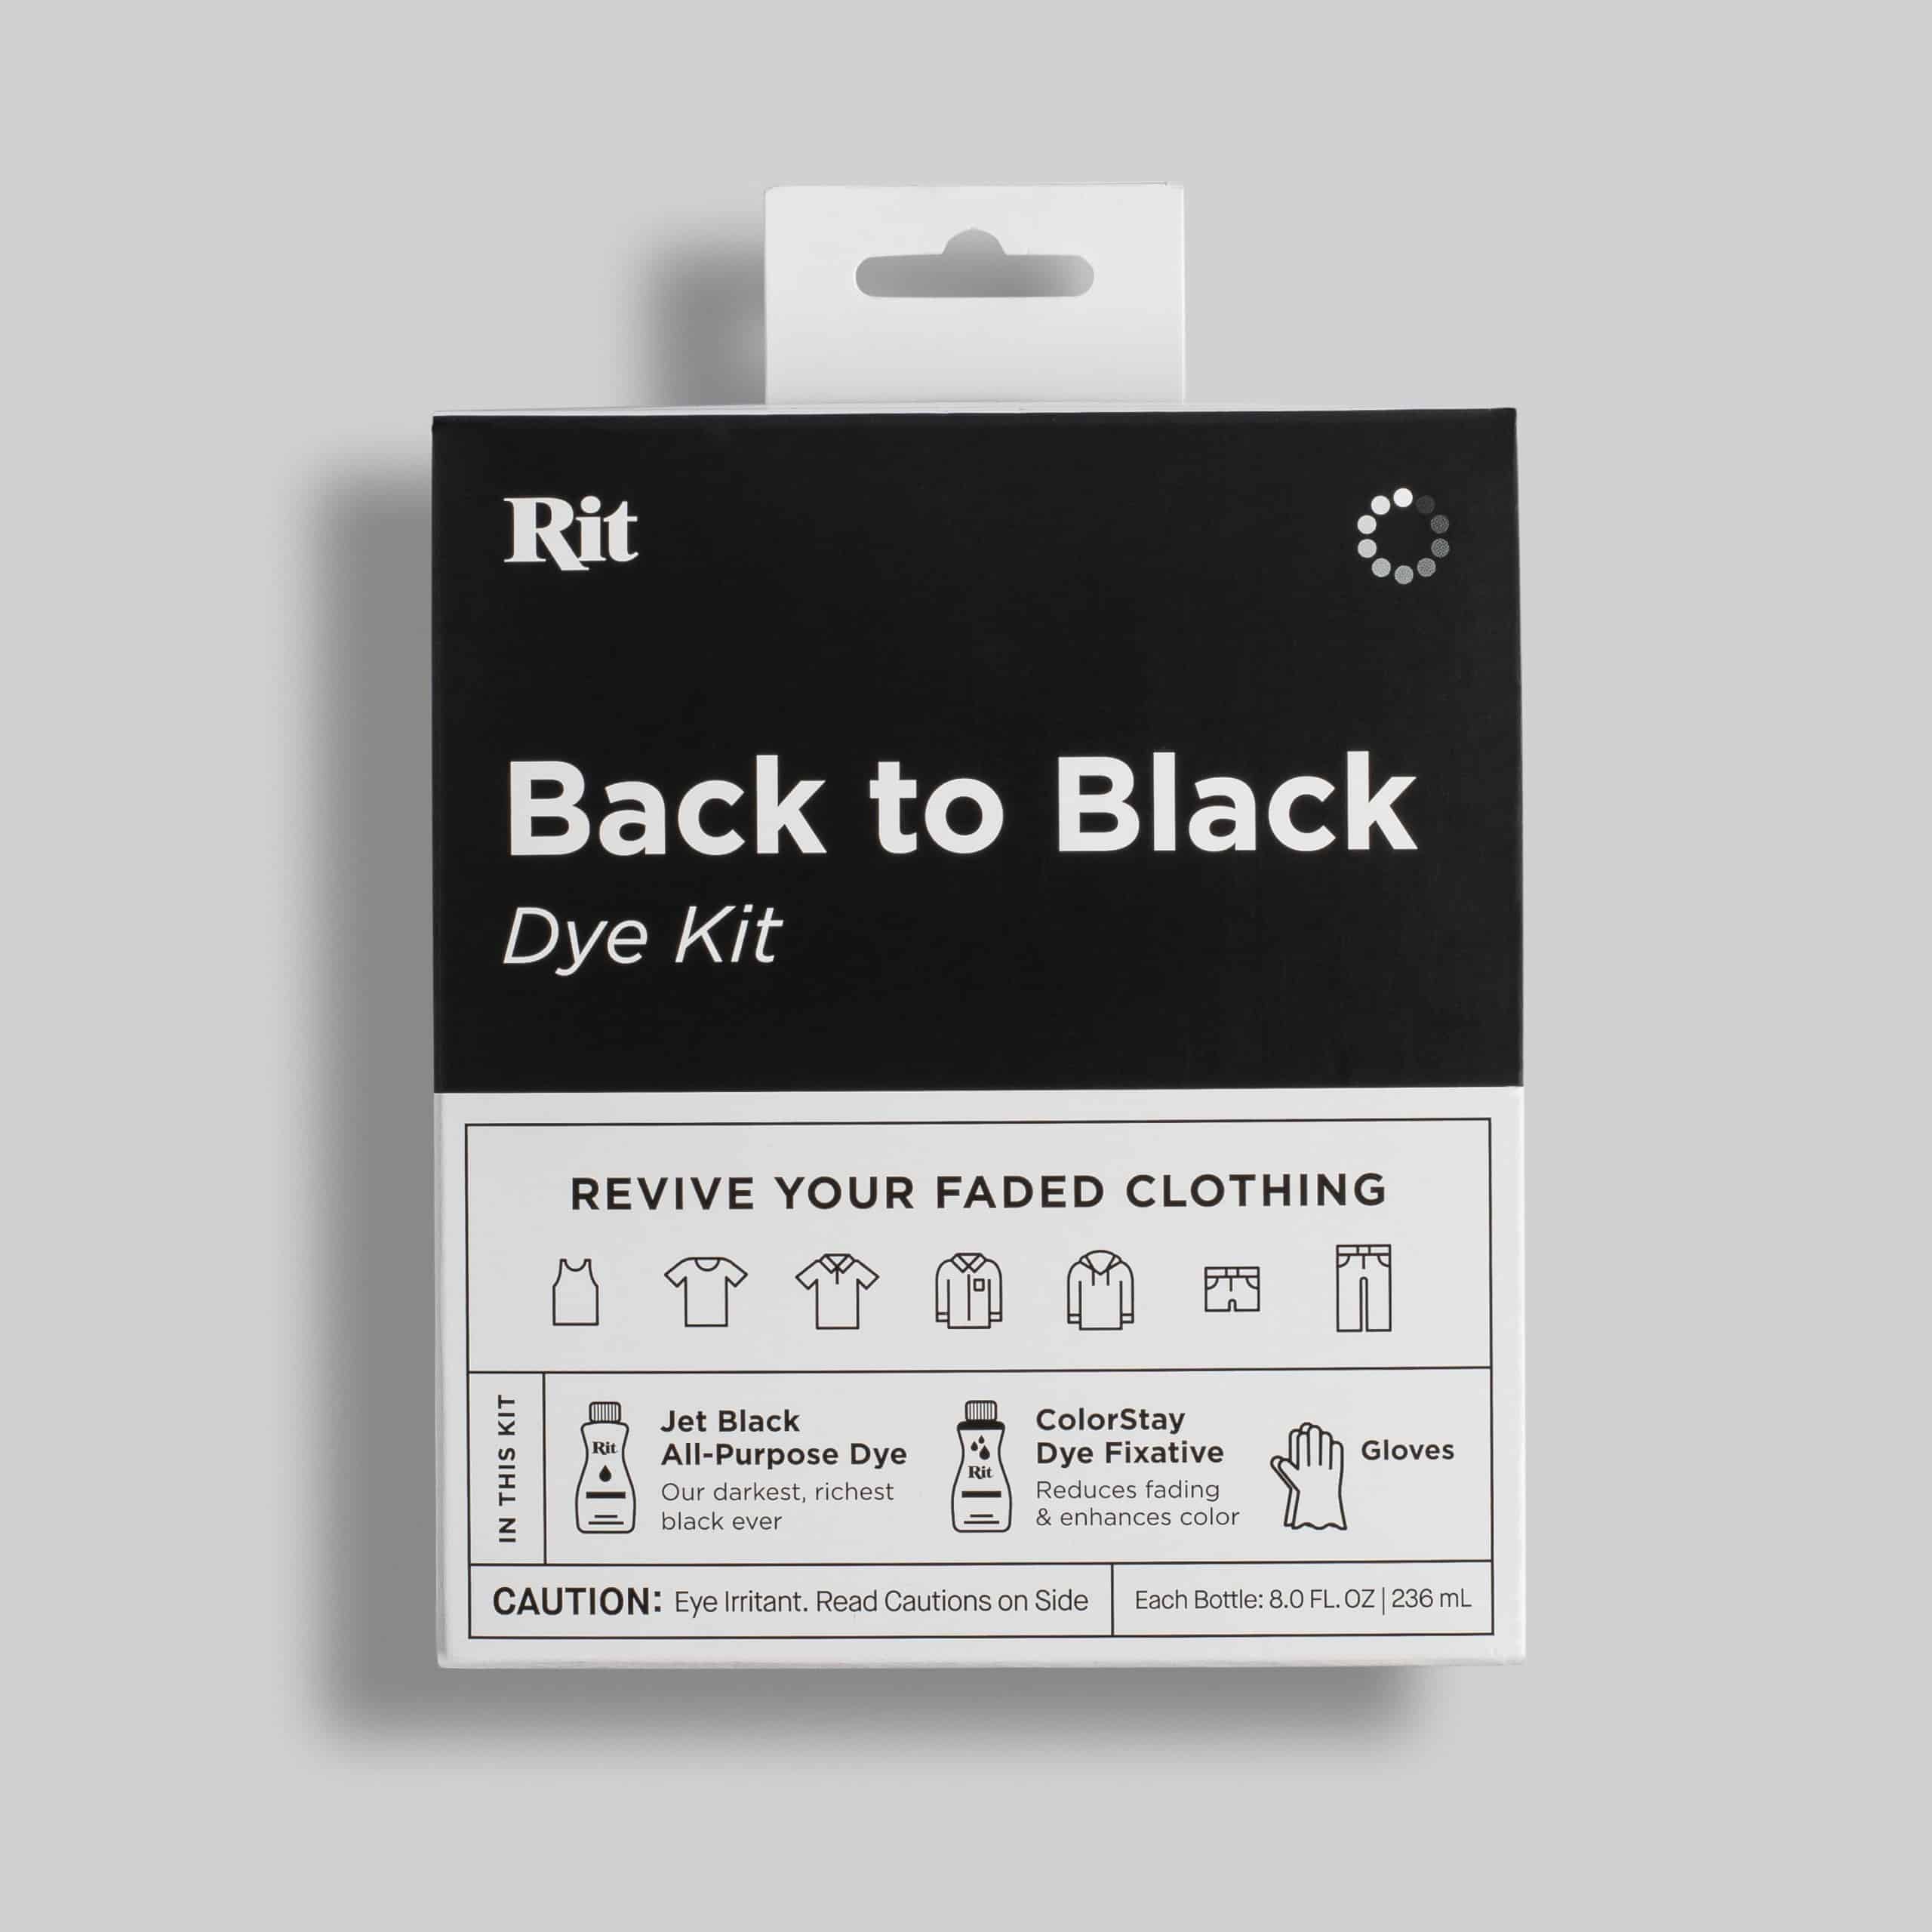  Rit Back to Black Dye Kit - Restore Your Faded Color